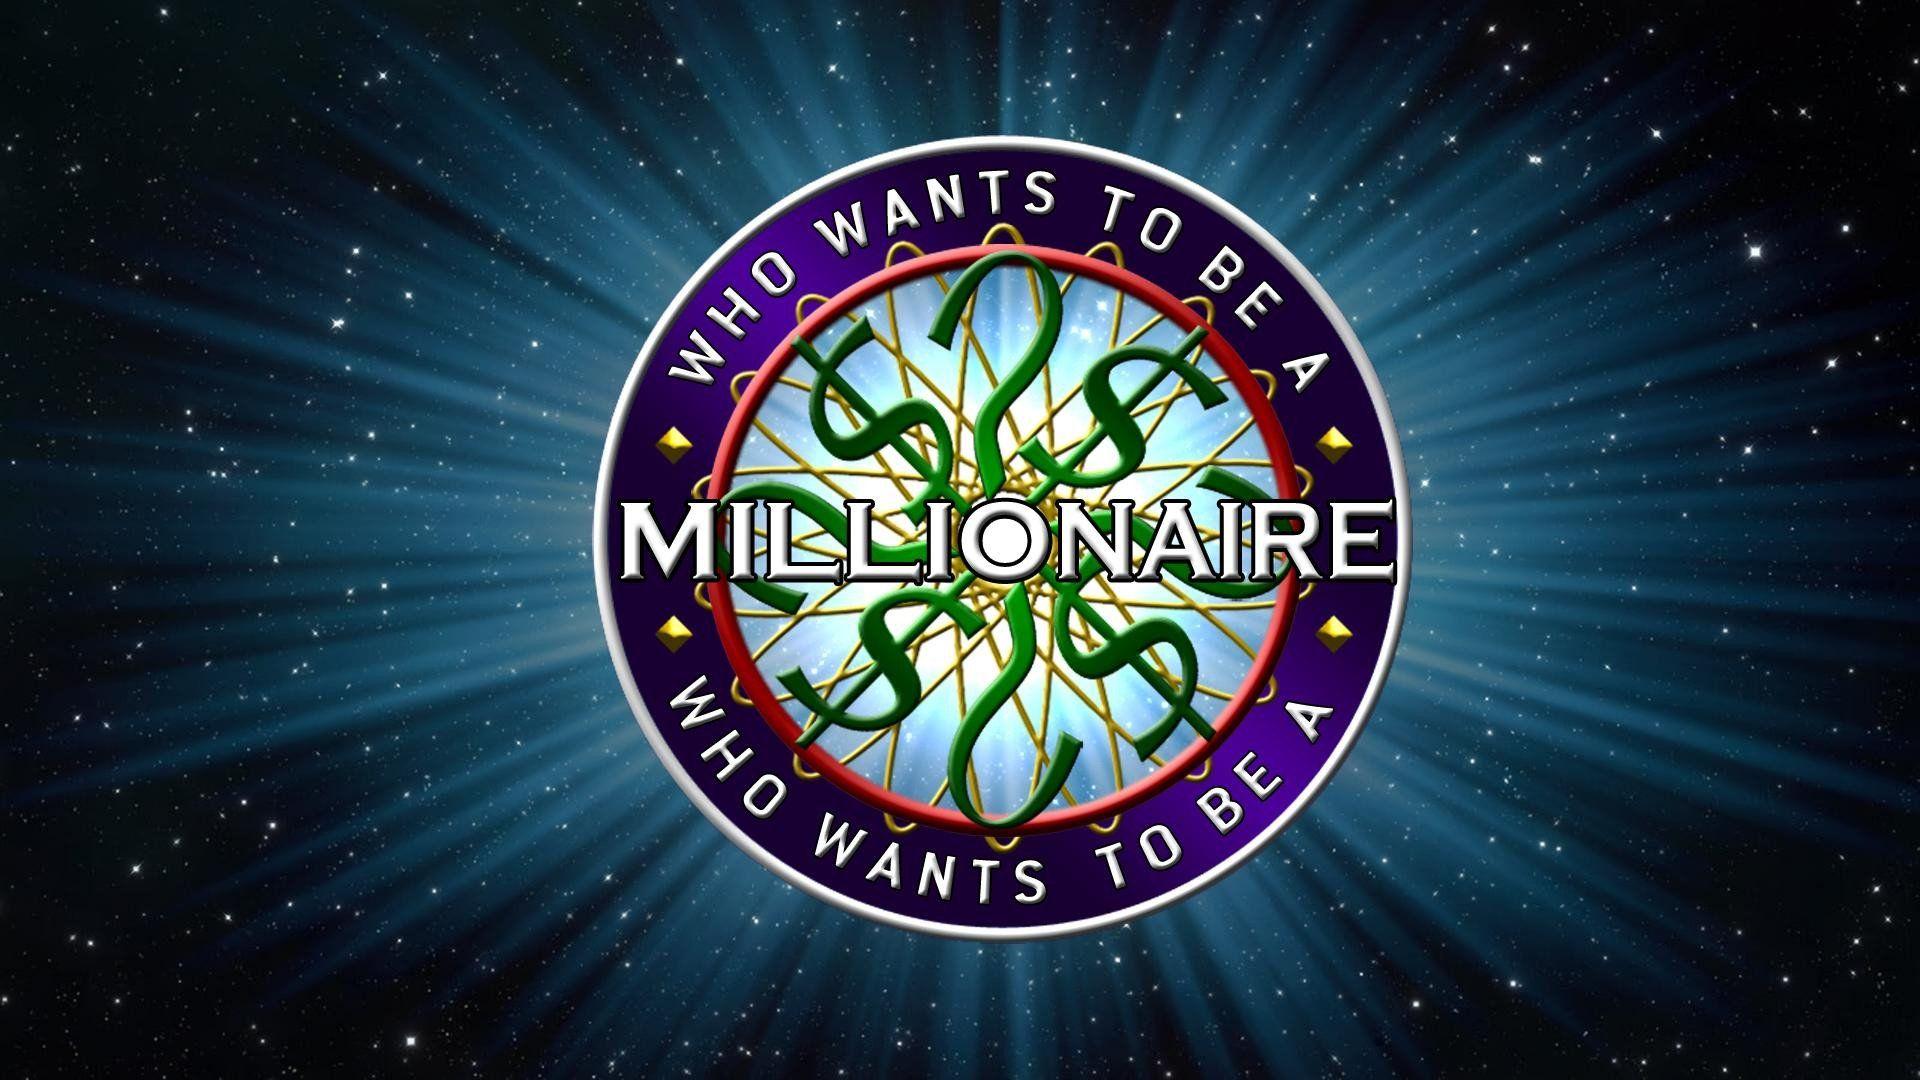 Who wants to be the to my. Who wants to be a Millionaire. Who wants to be a Millionaire game.